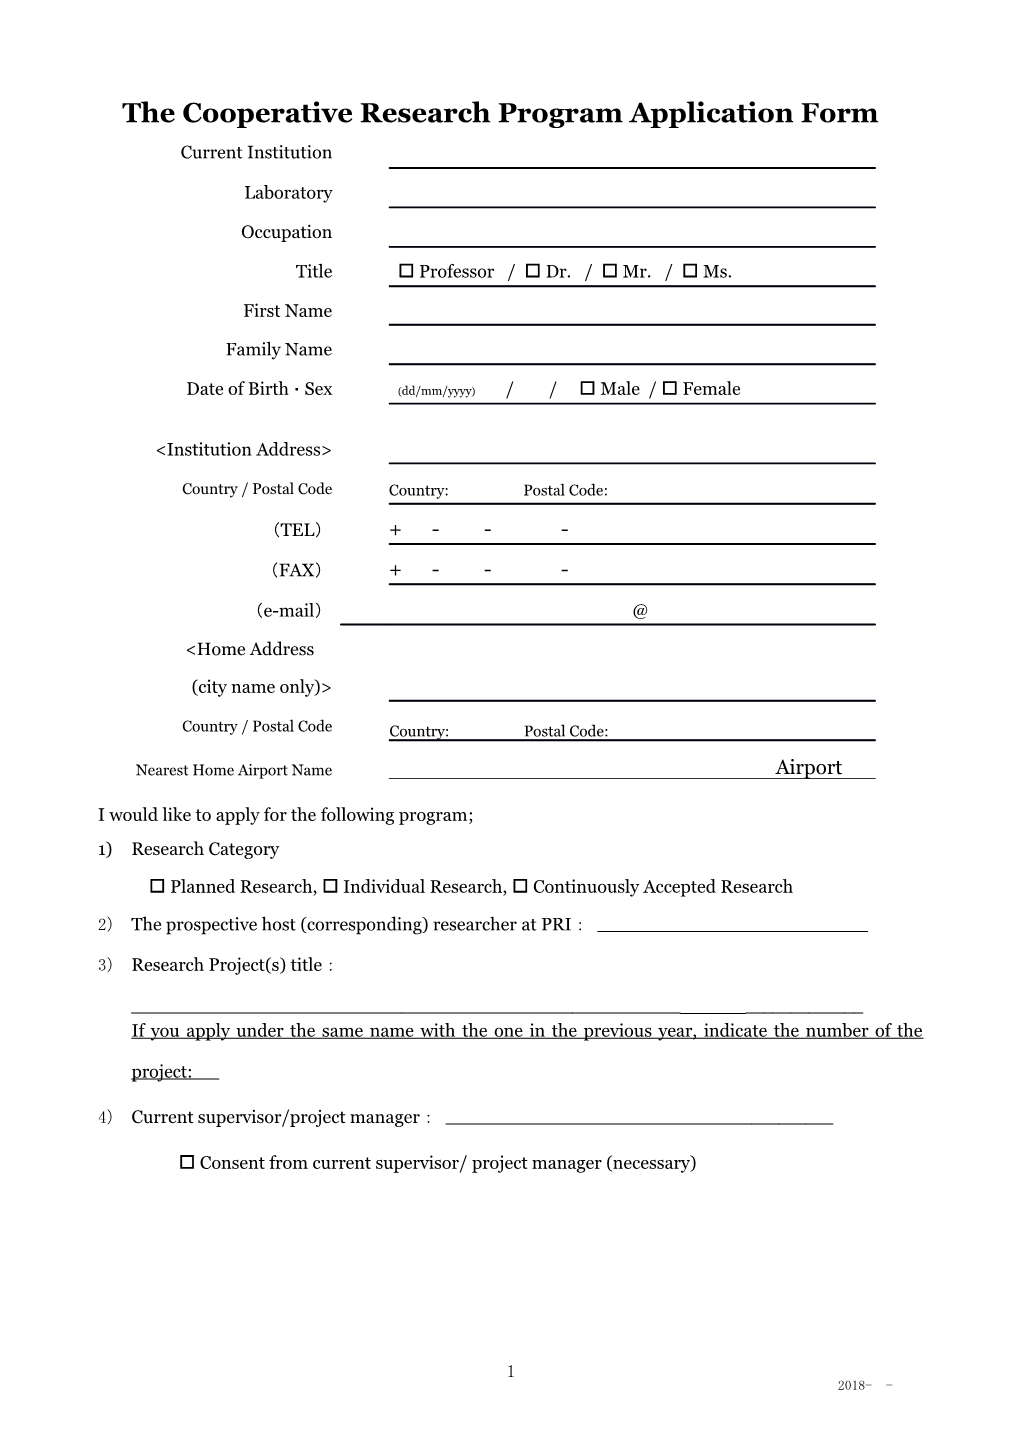 The Cooperative Research Program Application Form